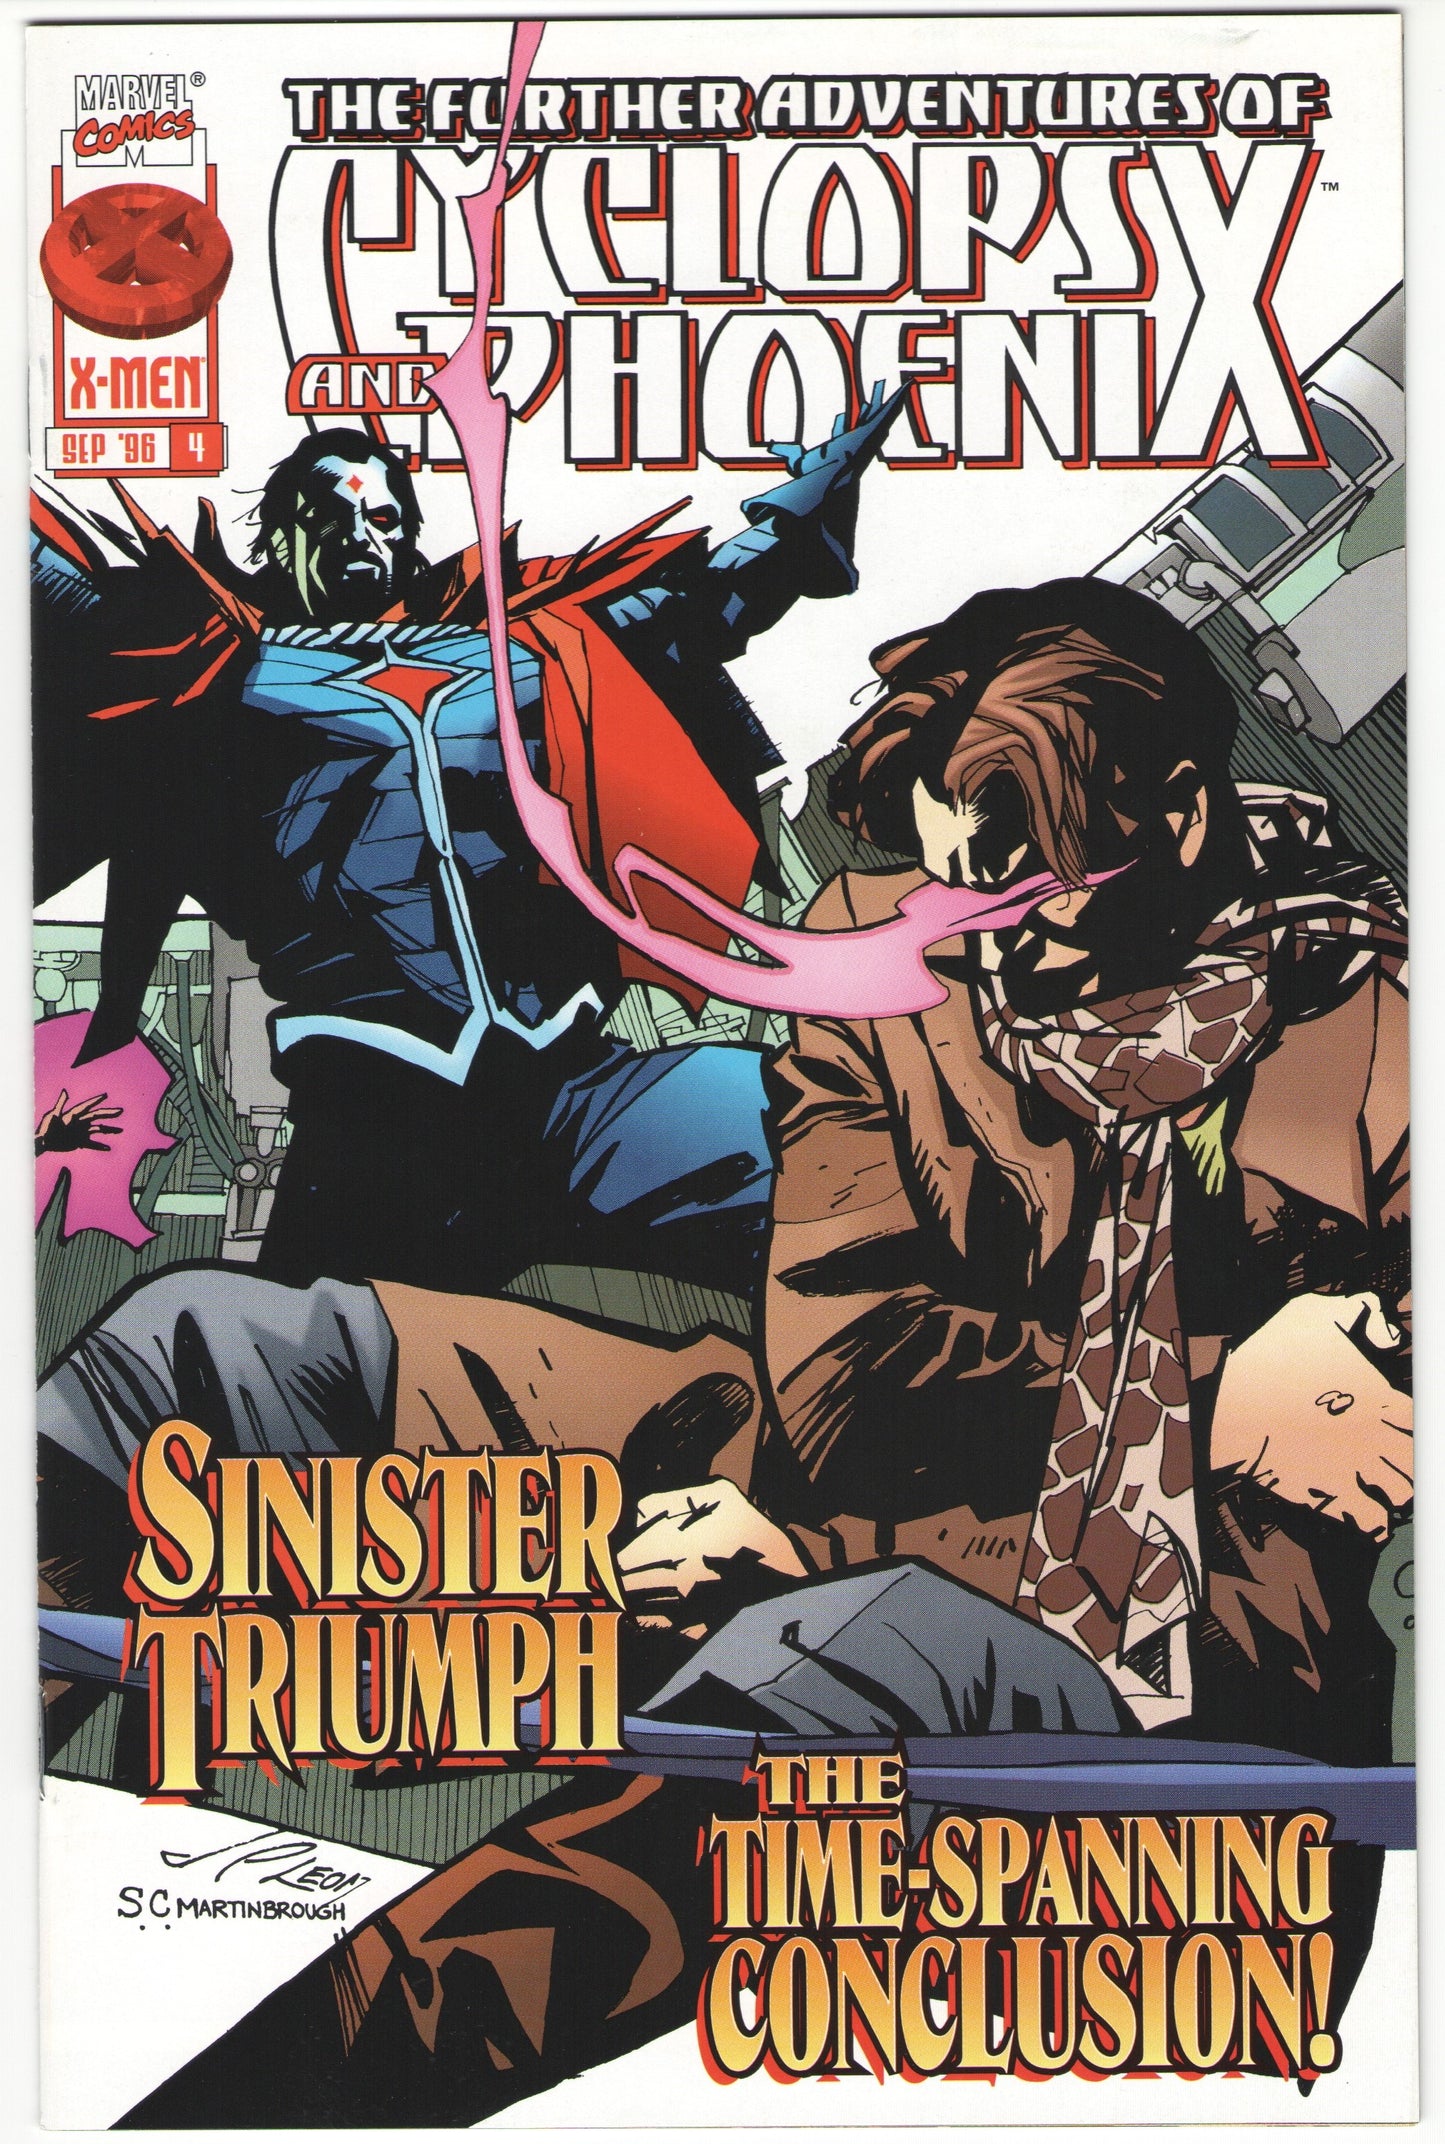 Further Adventures of Cyclops & Phoenix (1996) Complete Limited Series